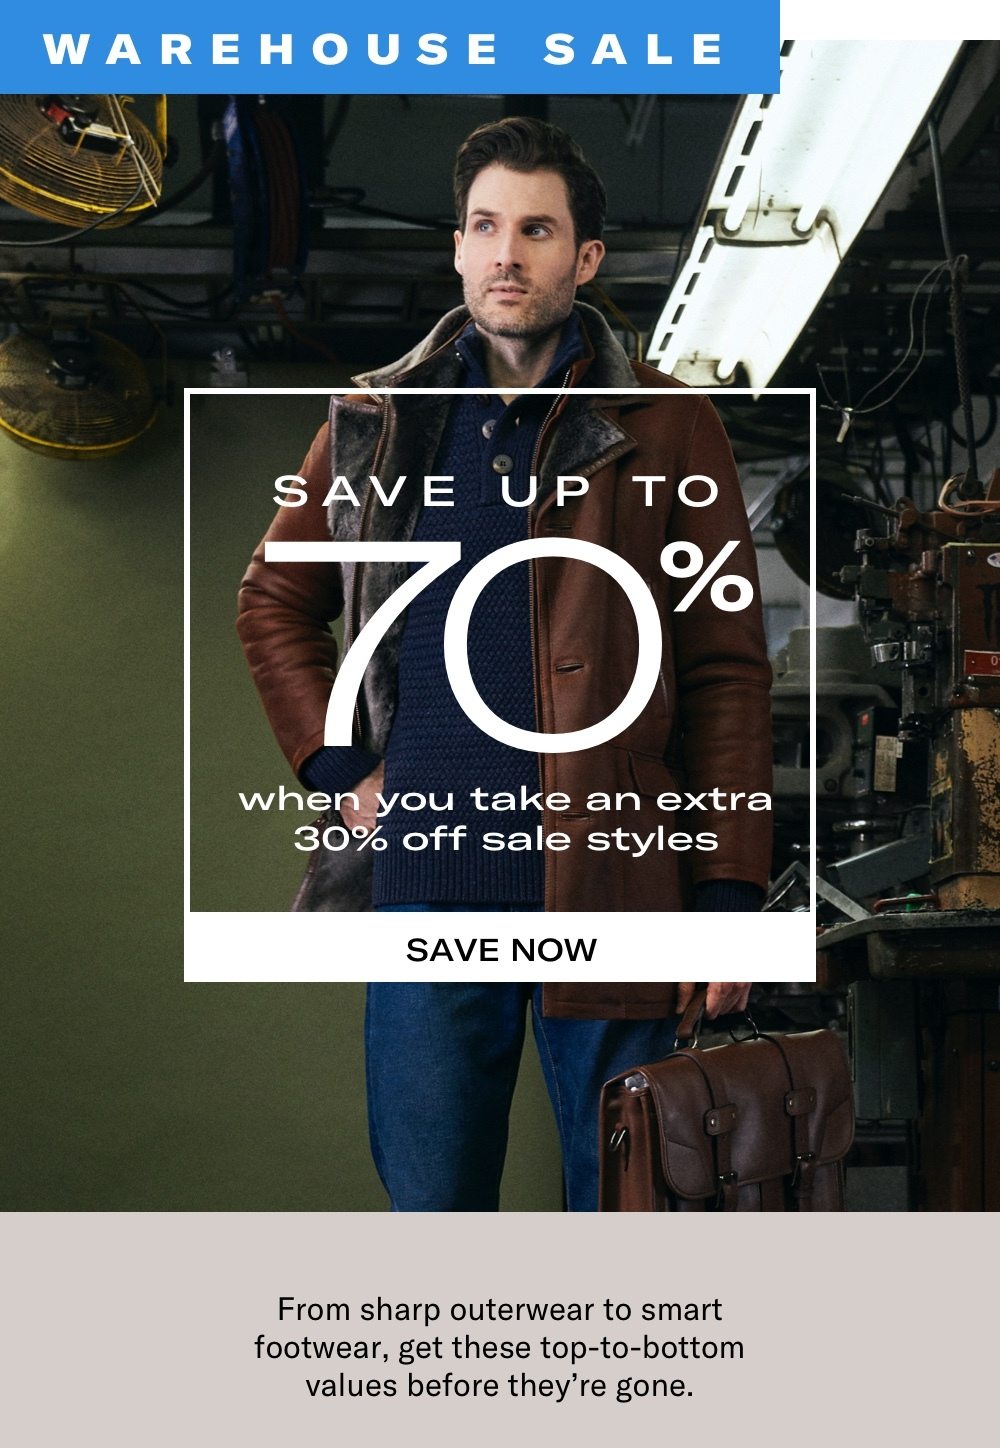 Starts Now Warehouse Sale - Save up to 70% when you take an extra 30% off sale styles